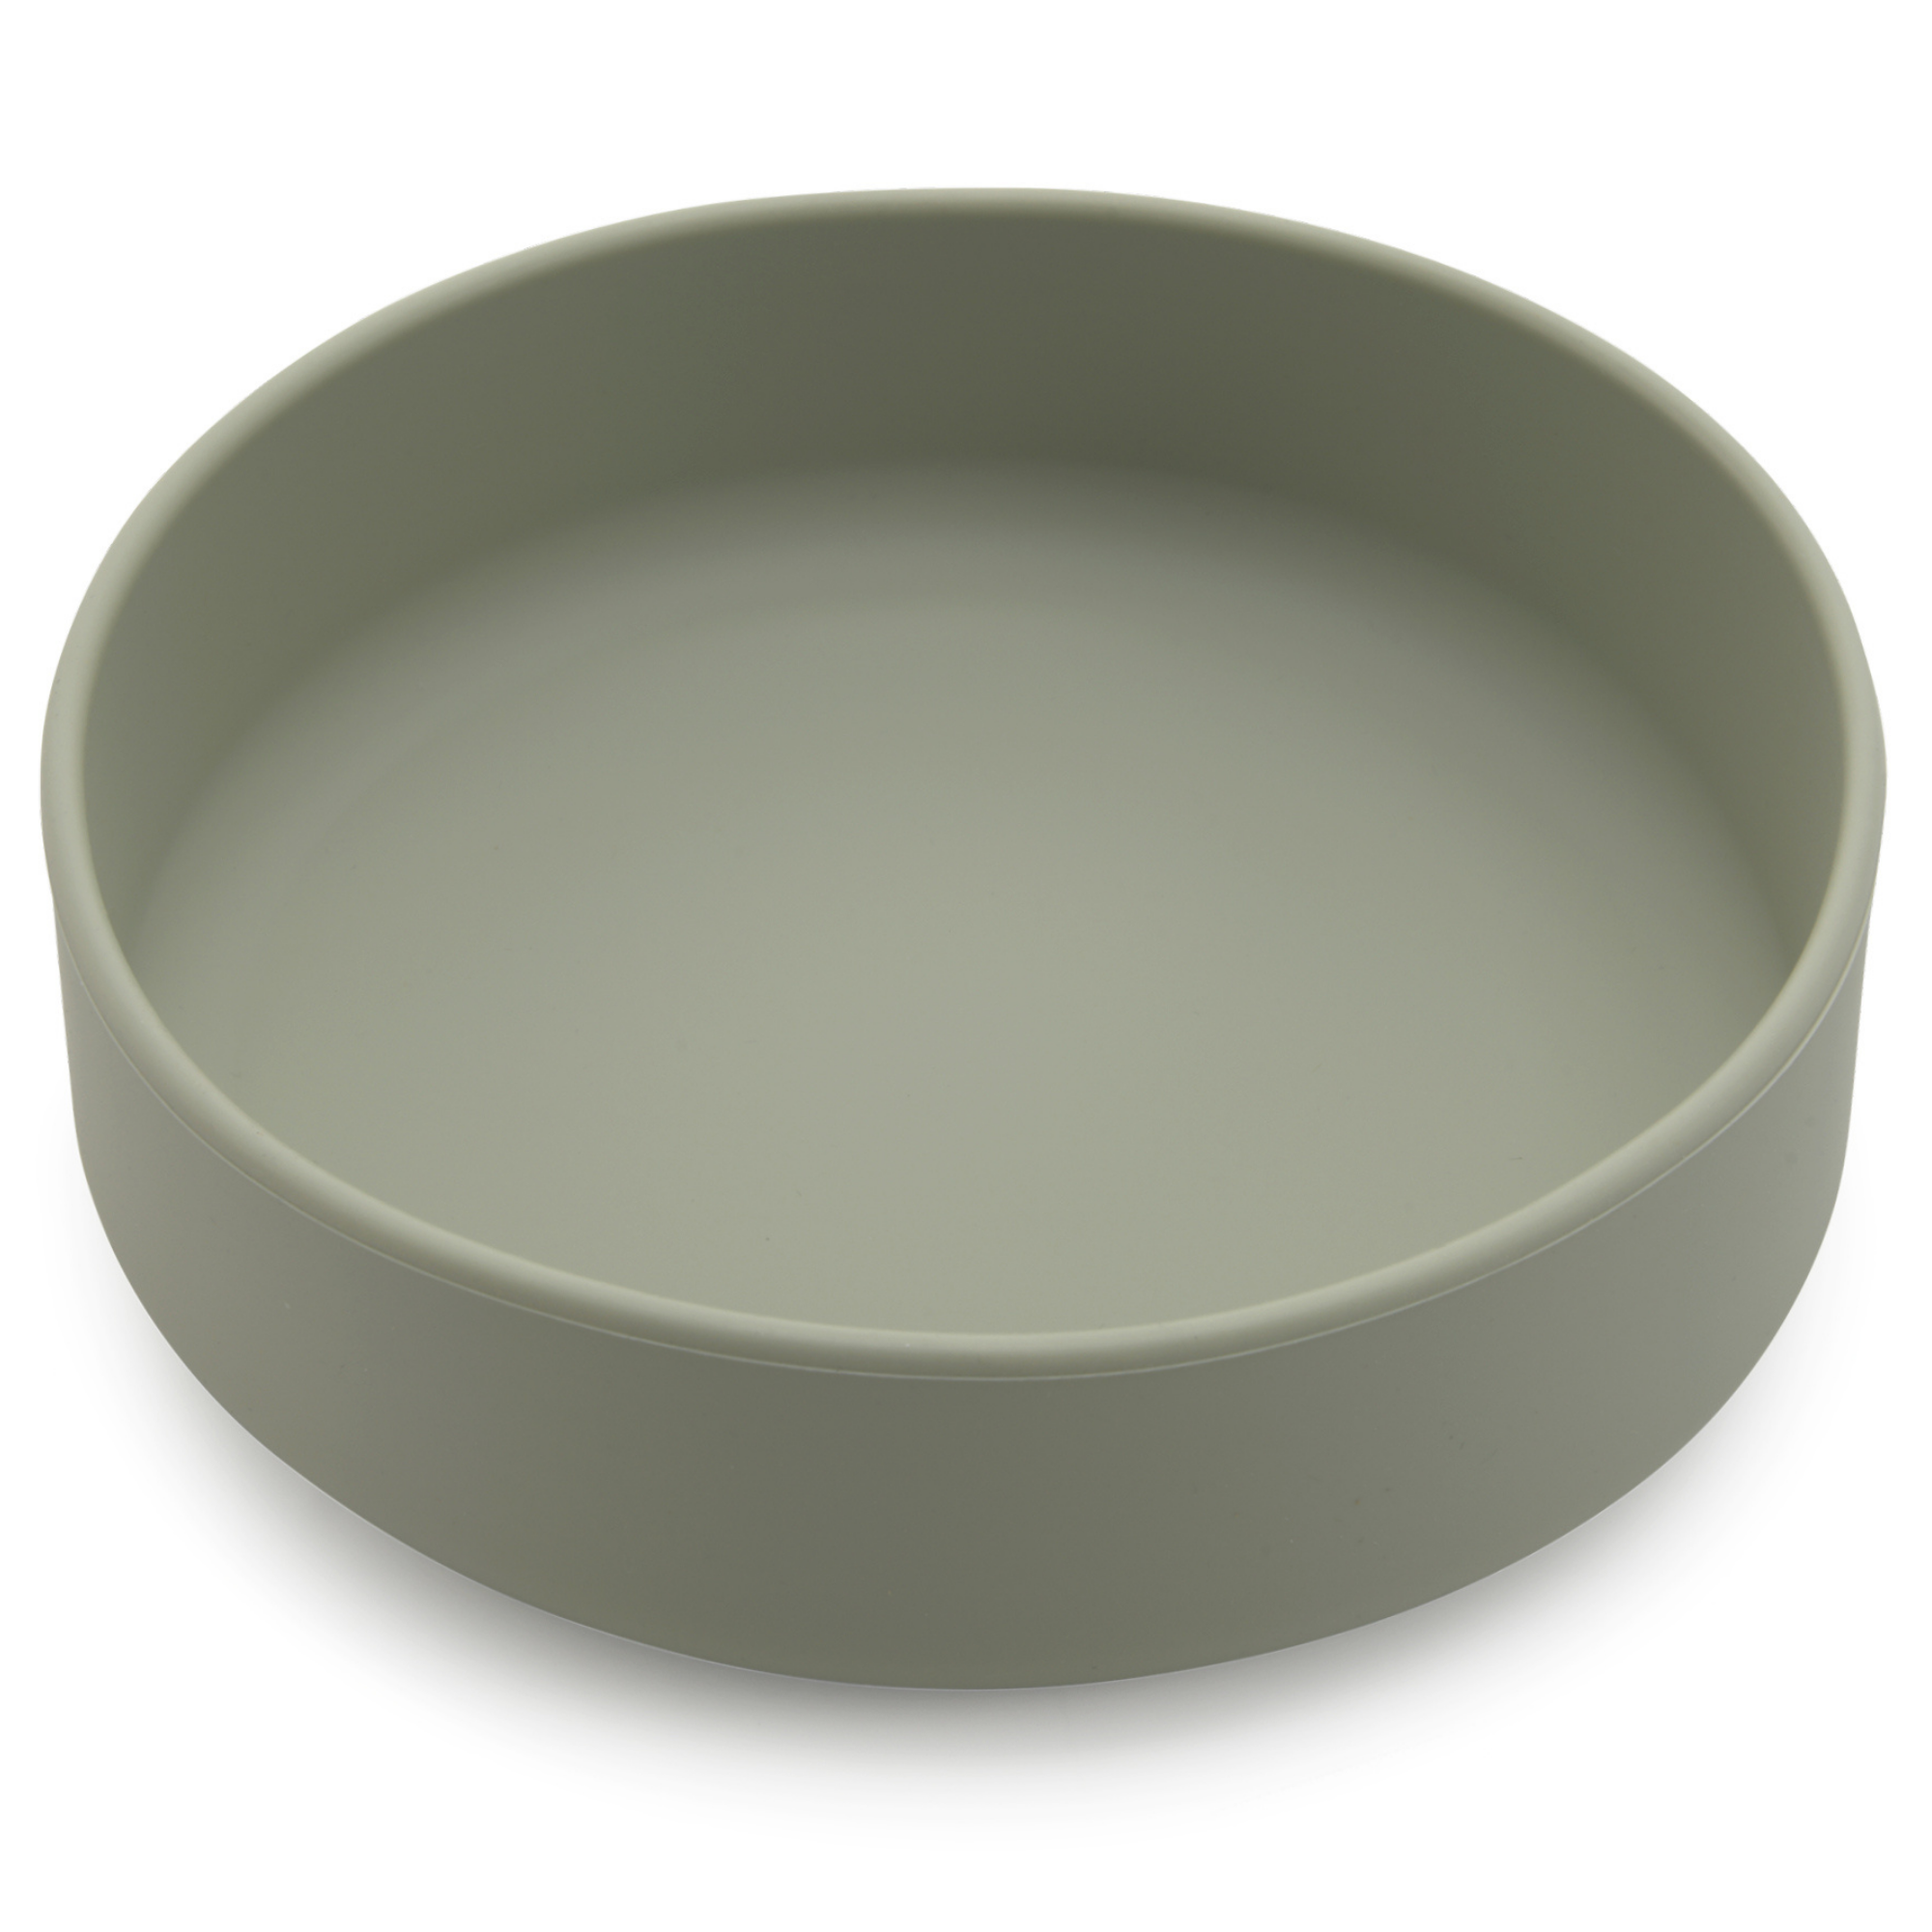 The Medium Perfect Dish: Spill-Proof Silicone Pet Bowl